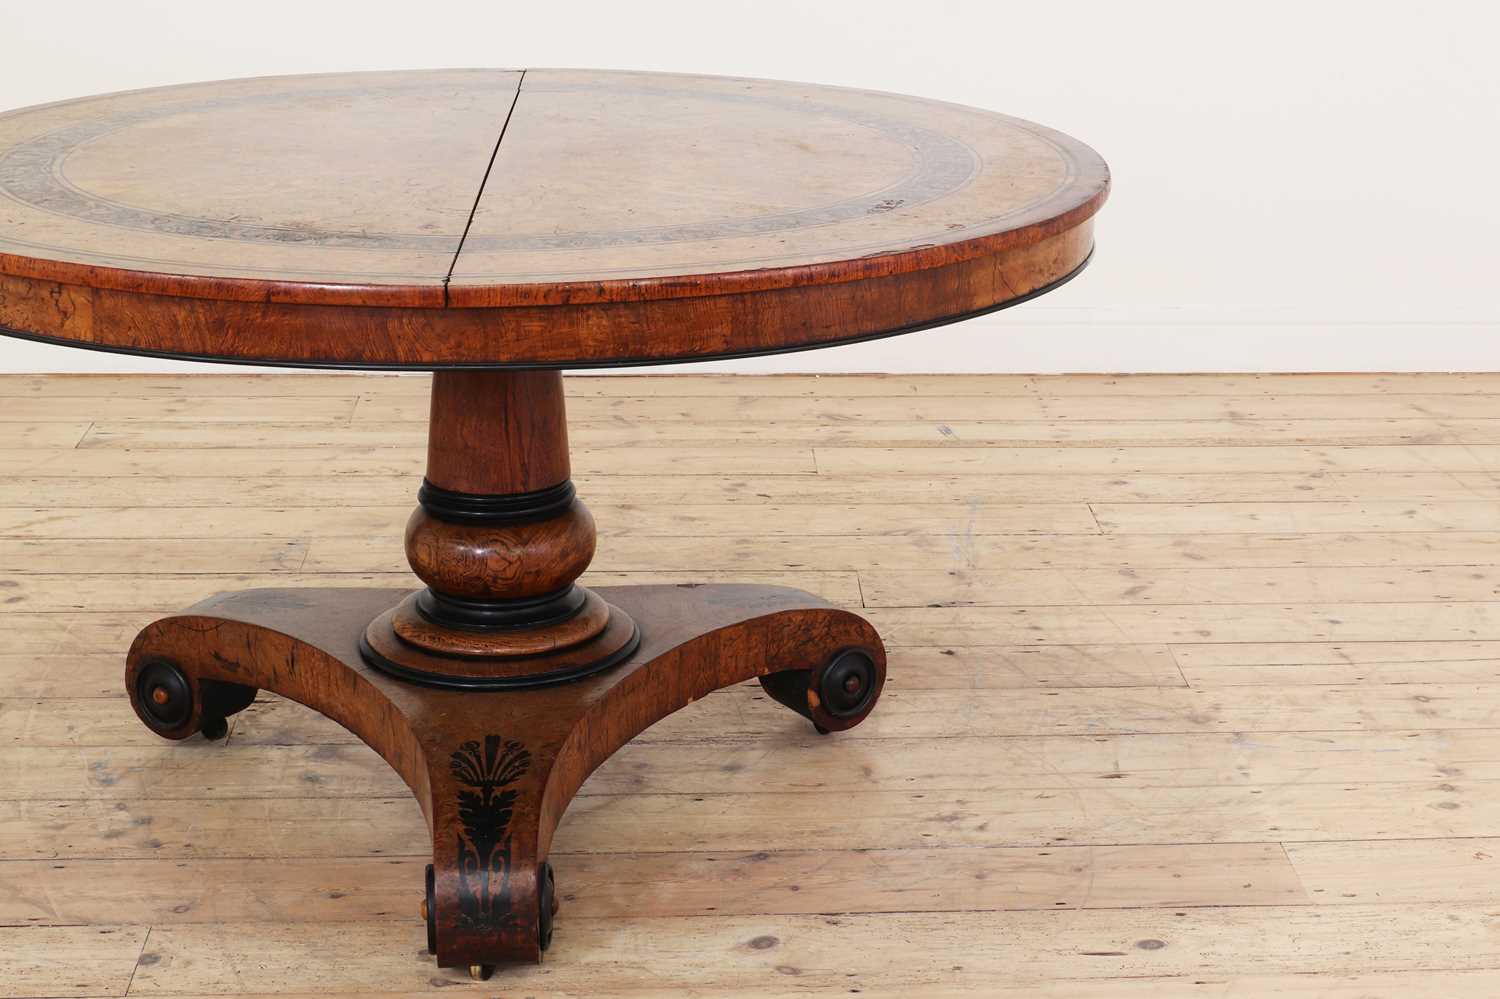 A Regency pollard oak, yew and ebony centre table attributed to George Bullock, - Image 8 of 51